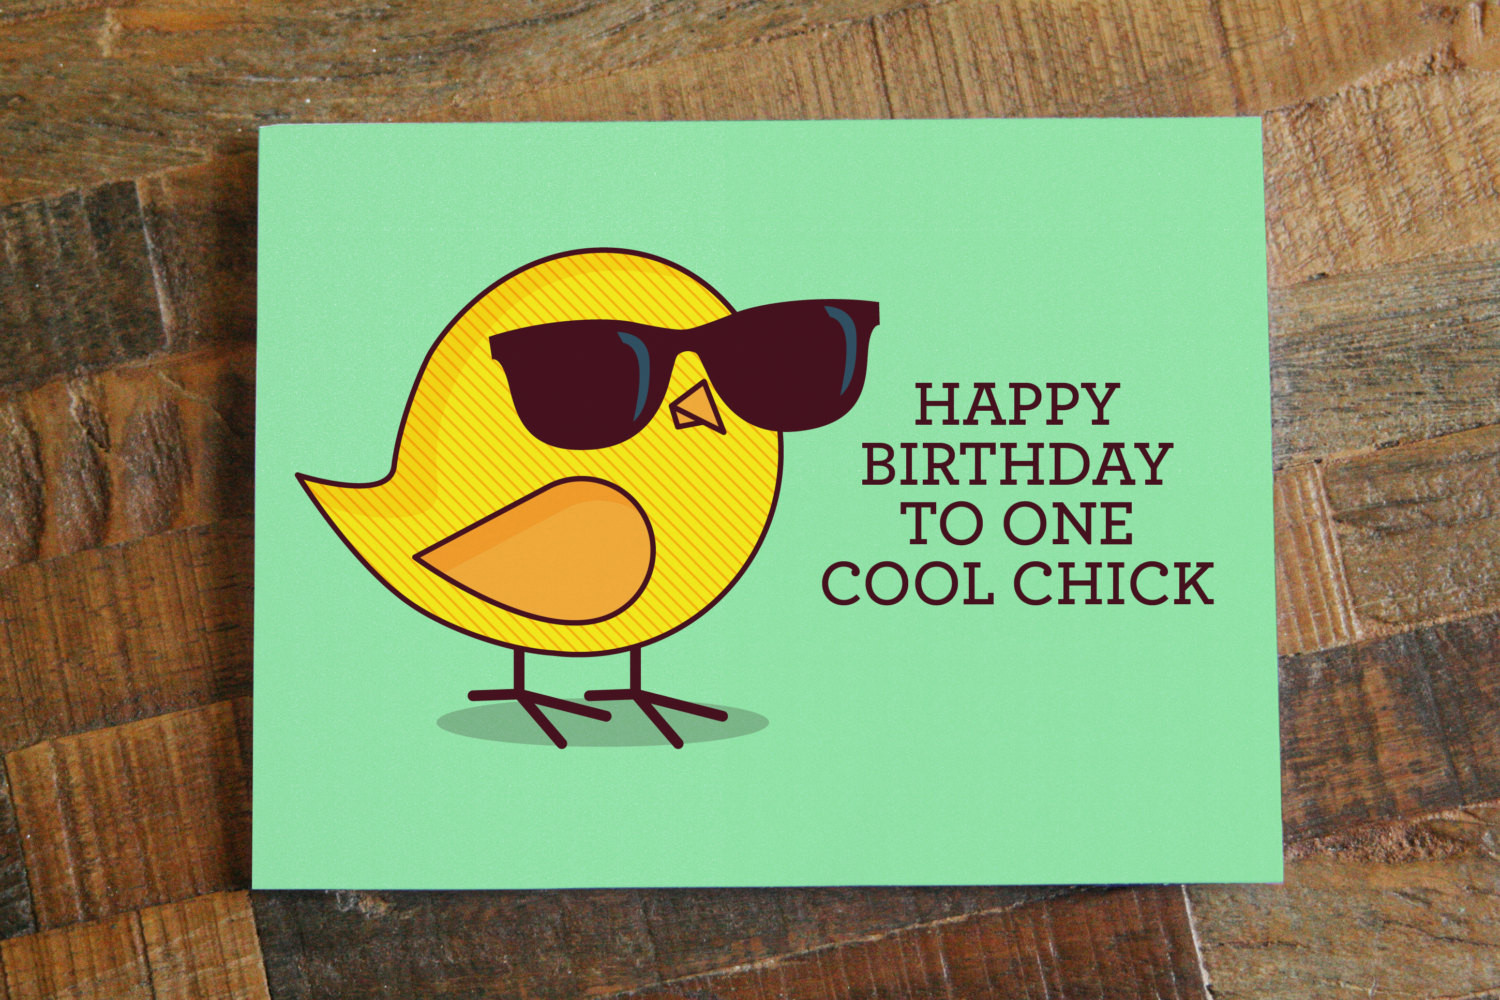 Funny Happy Birthday Quotes For Her
 Funny Birthday Card For Her "Happy Birthday to e Cool